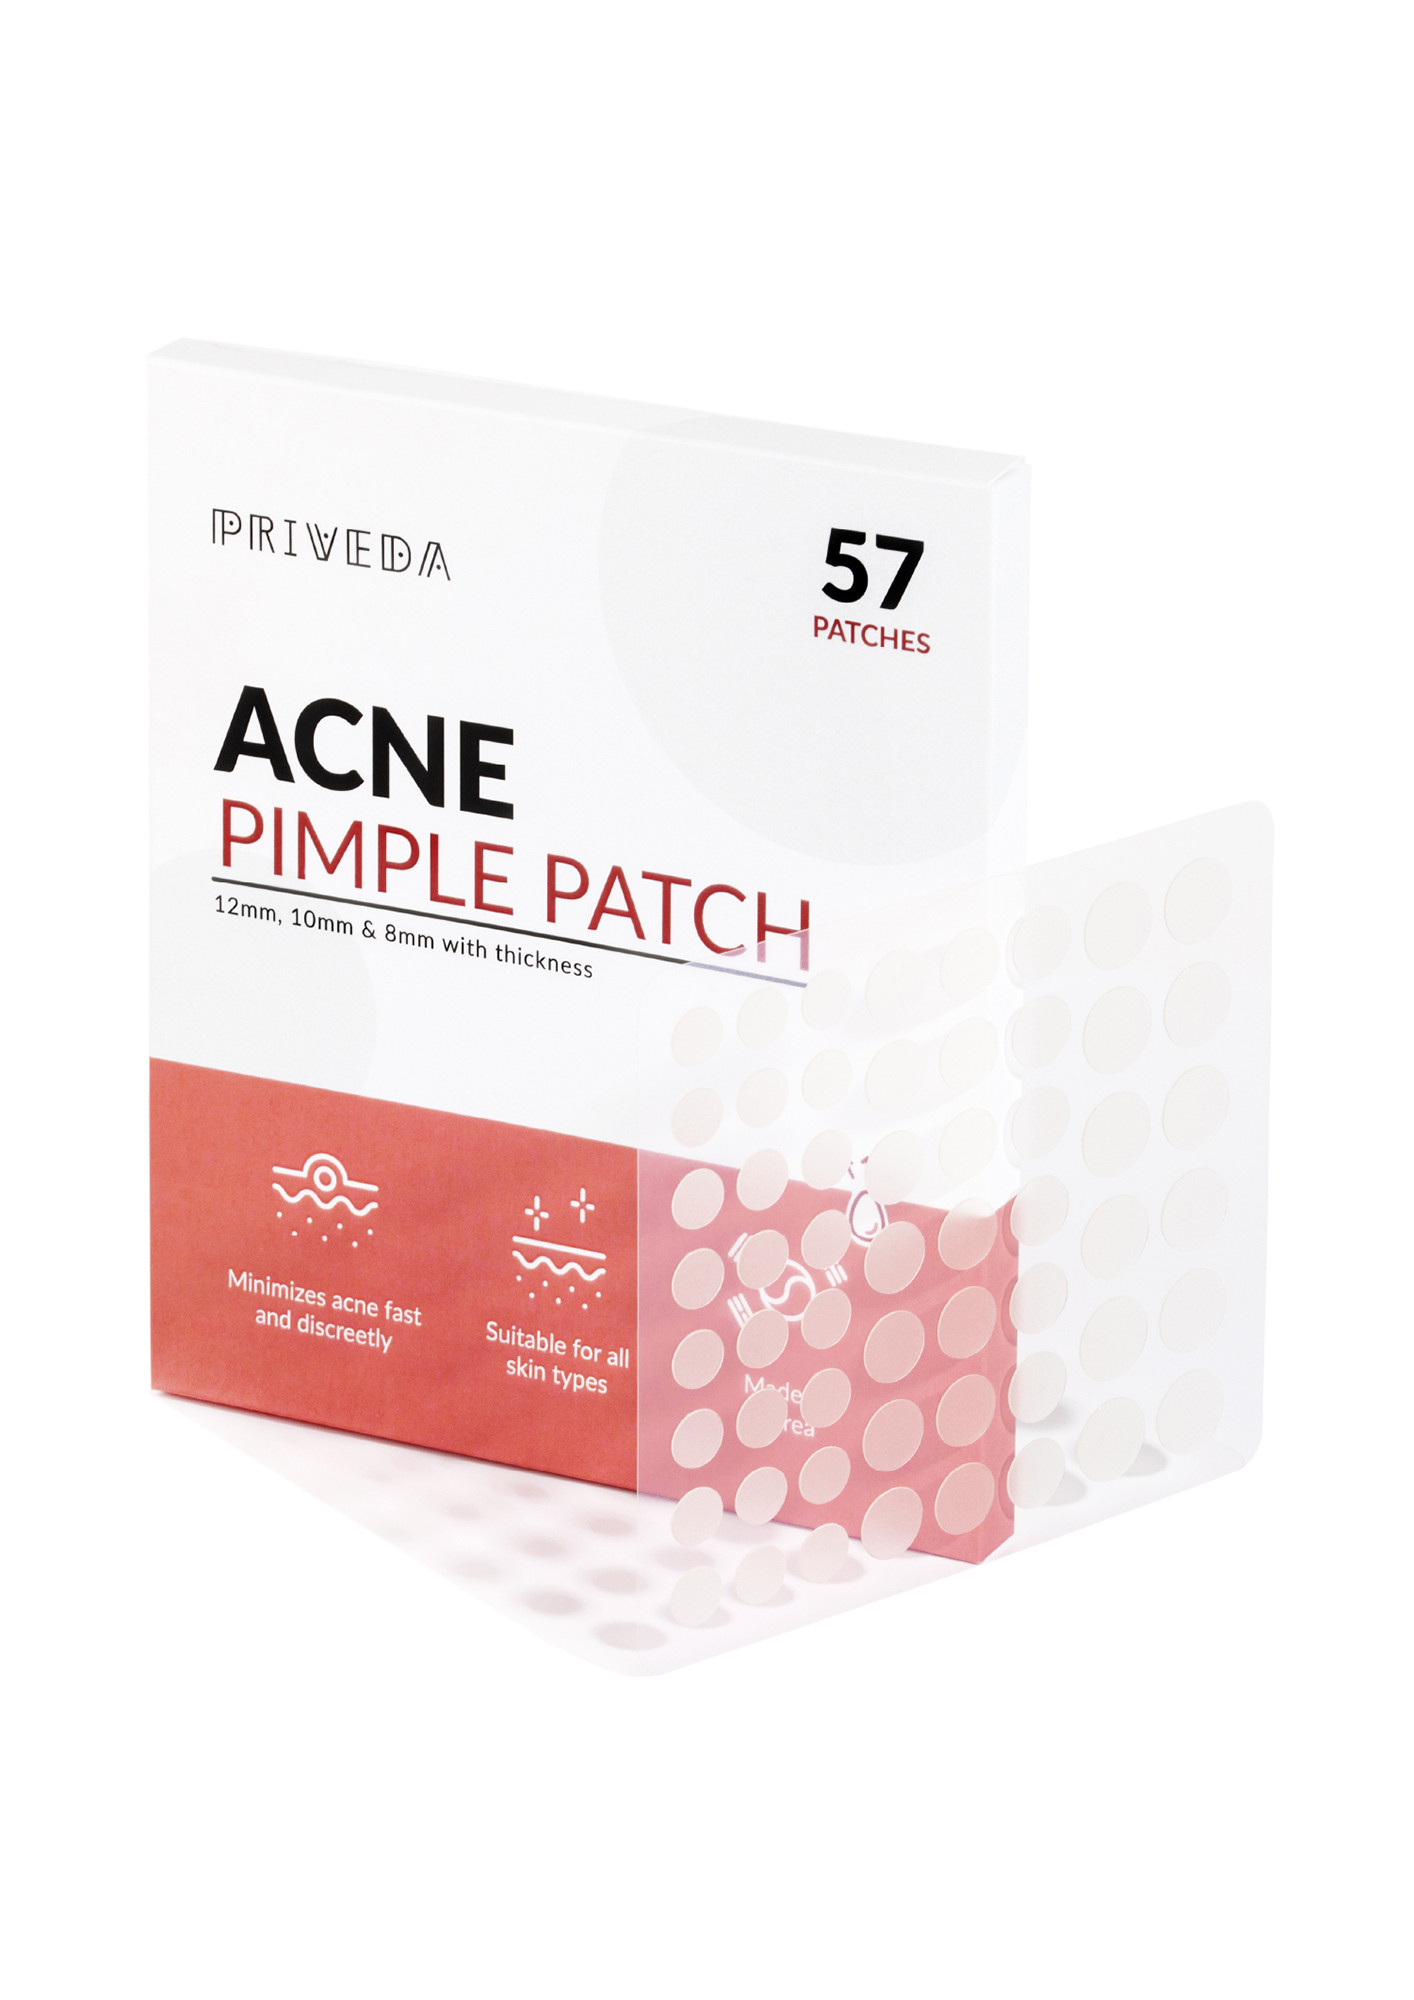 PRIVEDA Acne Pimple Patch 57 Units Hydrocolloid Made in Korea 3 Sizes 8mm 10mm 12mm Waterproof